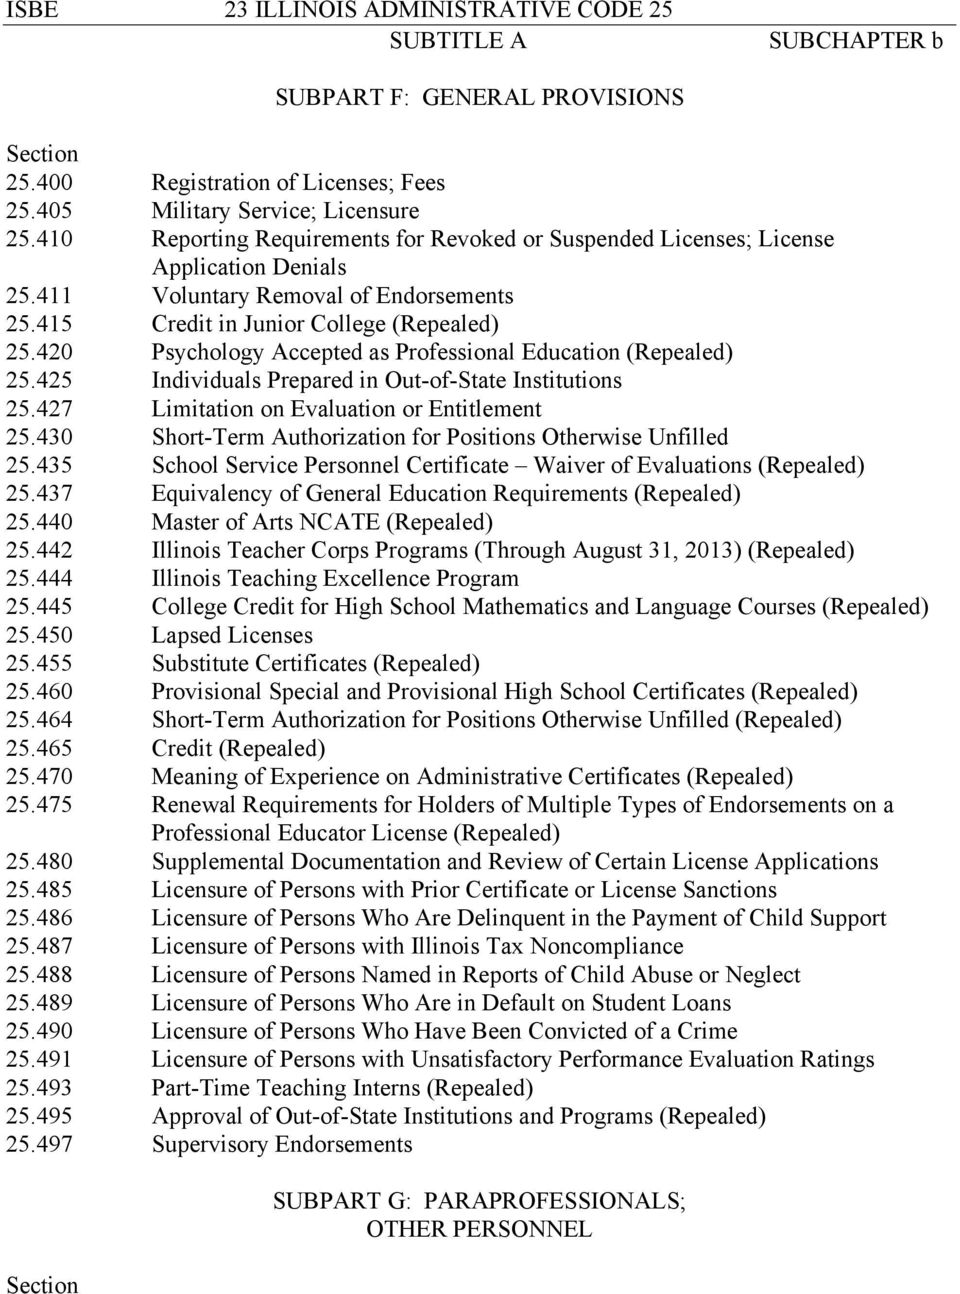 420 Psychology Accepted as Professional Education (Repealed) 25.425 Individuals Prepared in Out-of-State Institutions 25.427 Limitation on Evaluation or Entitlement 25.